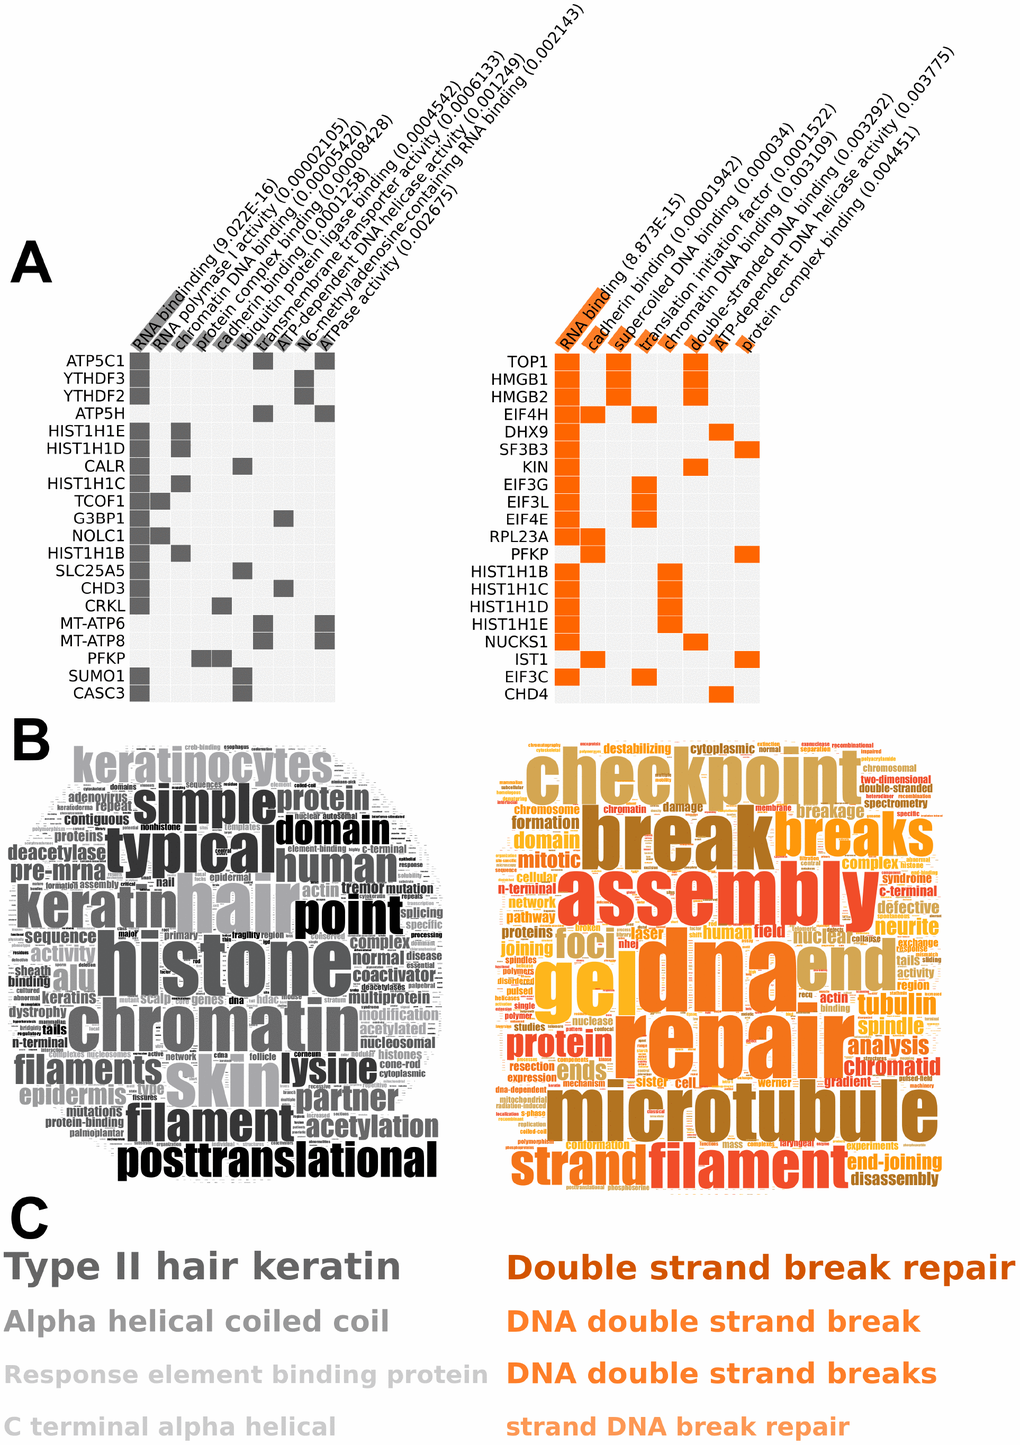 RXFP3 constellation, differential overexpression of RXFP3 indicates a role in DNA damage response. (A–C) The results from the bioinformatic analysis of 0.5 μg RXFP3-HA (Left, grey), and 5 μg RXFP3-HA overexpression (Right, orange) using (B) Gene Ontology through Enrichr [50]; (C) Wordcloud generation and (D) phrase frequency counting (WriteWords) of the words and noun-phrases extracted from Textrous! [54]. Here we see that a different overexpression level of RXFP3, indicates a different role of RXFP3, where with 0.5 μg RXFP3 we see a role in translation, and chromatin structure, while for 5 μg RXFP3 overexpression a role for DNA damage response and repair.